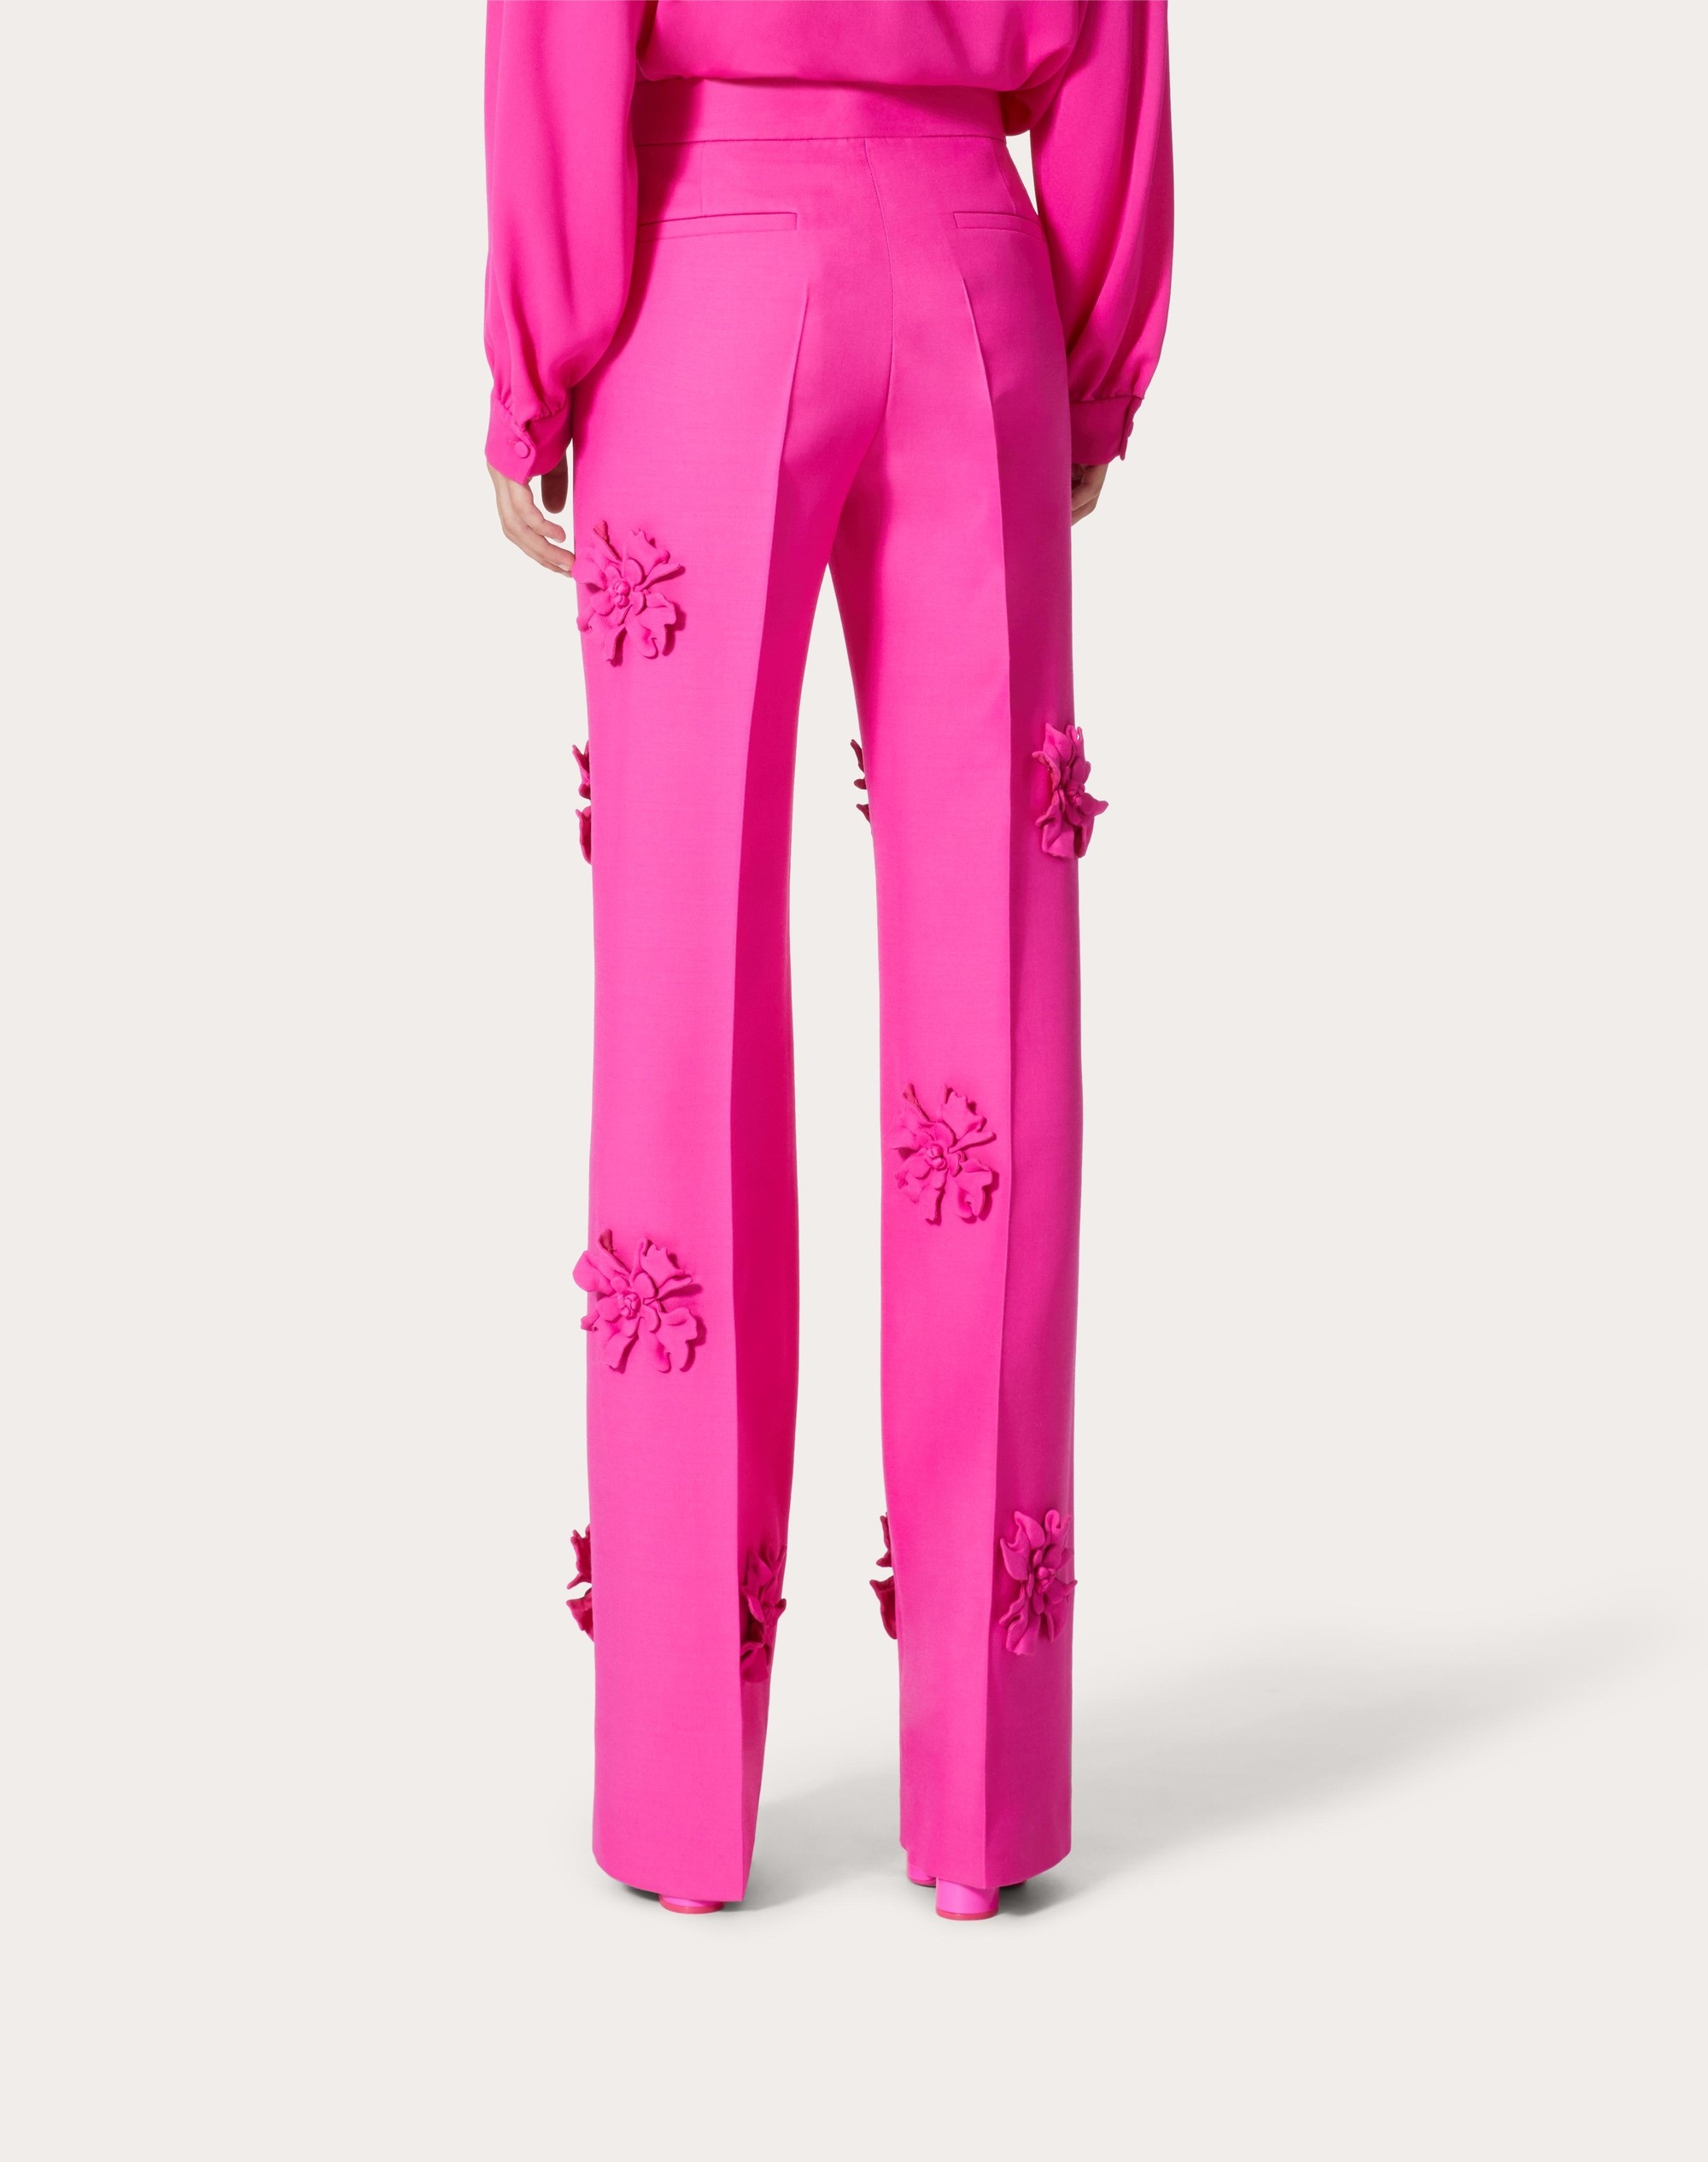 CREPE COUTURE TROUSERS WITH FLORAL EMBROIDERY - 7